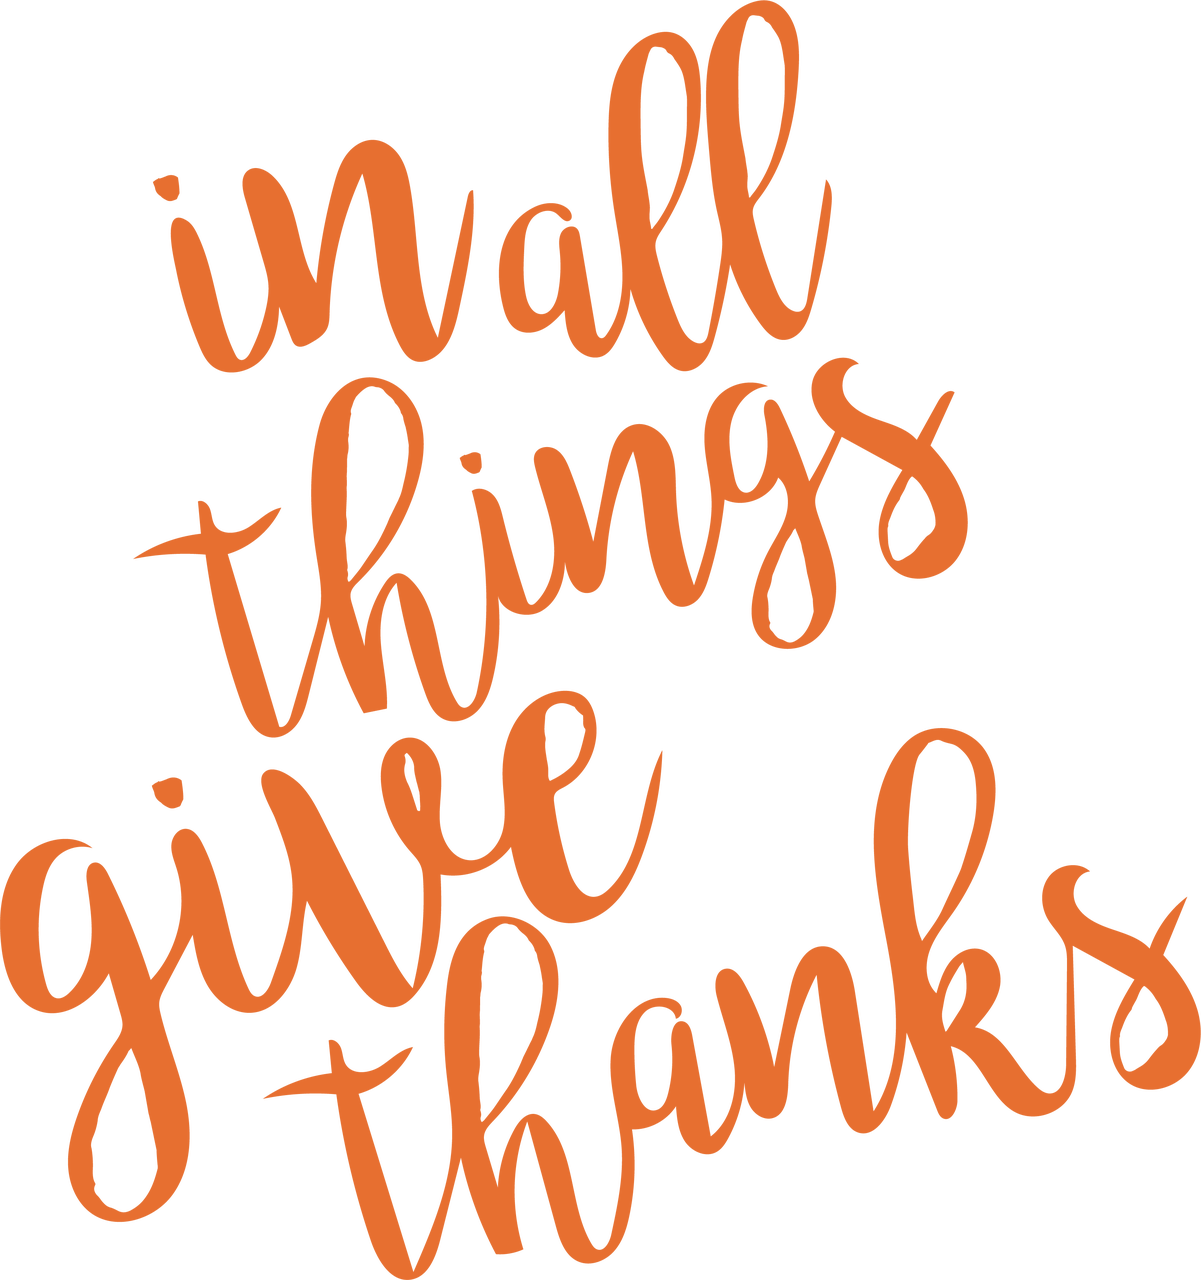 In All Things Give Thanks SVG Cut File